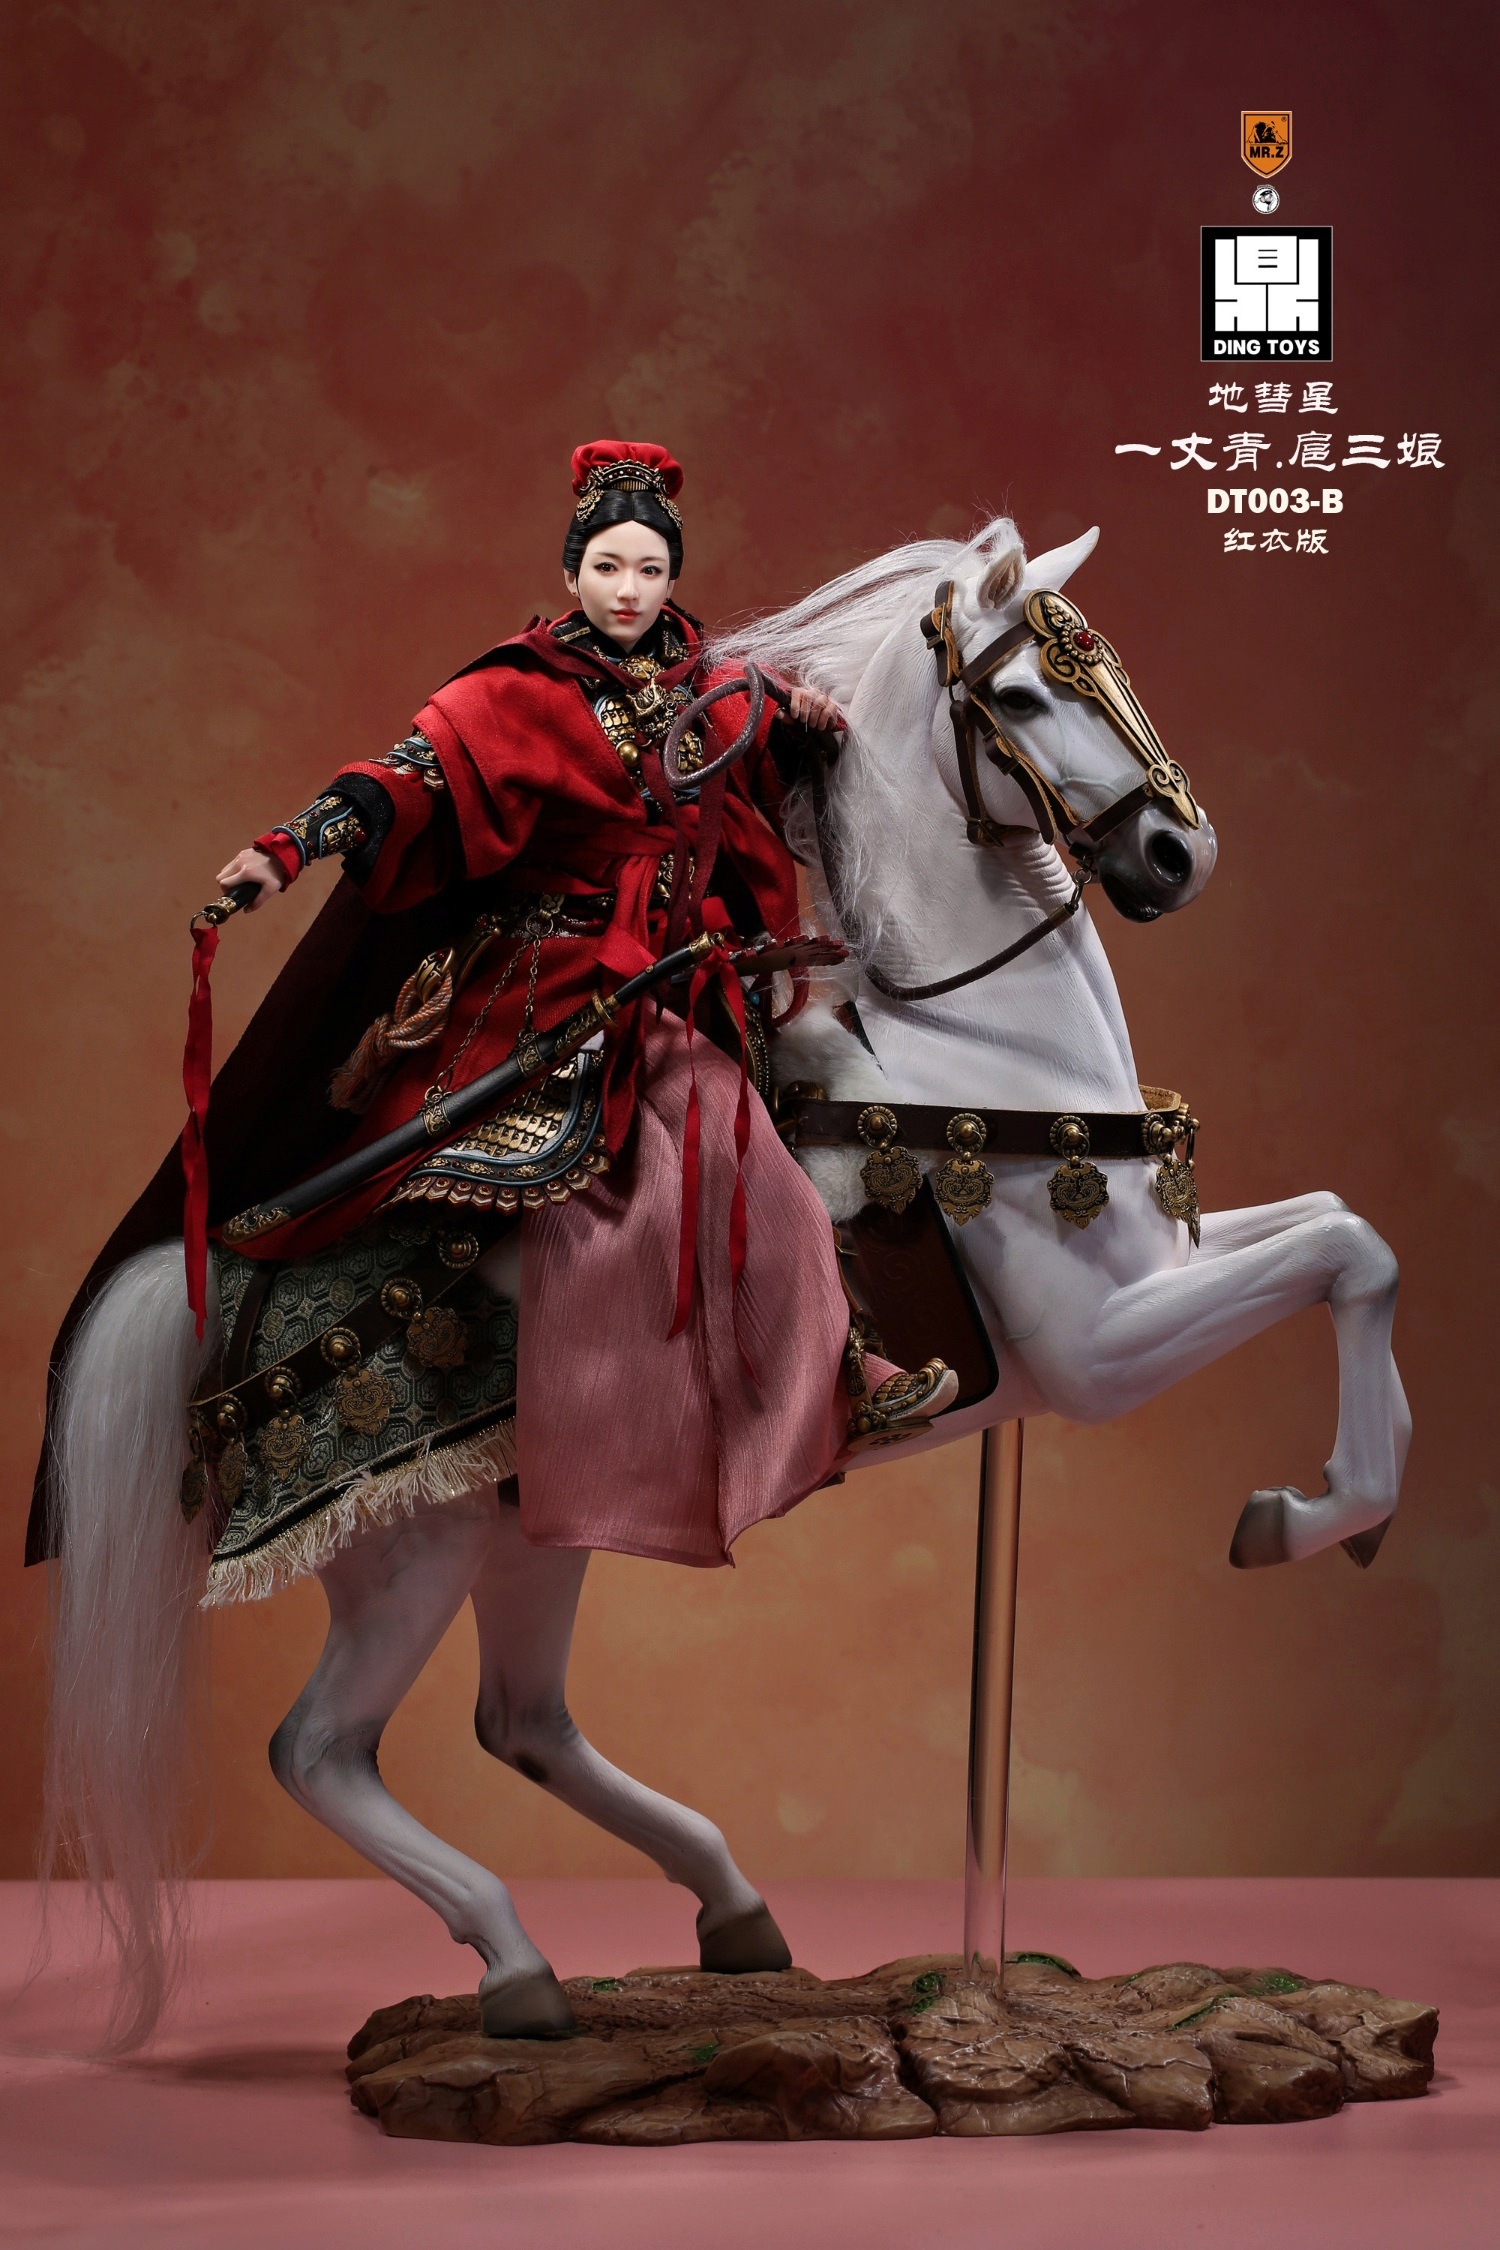 MrZ - NEW PRODUCT: Mr.Z x Ding Toys DT003 1/6 Scale 《Water Margin》Shiying Zhang (Green and Red versions), Horse (White) 3626